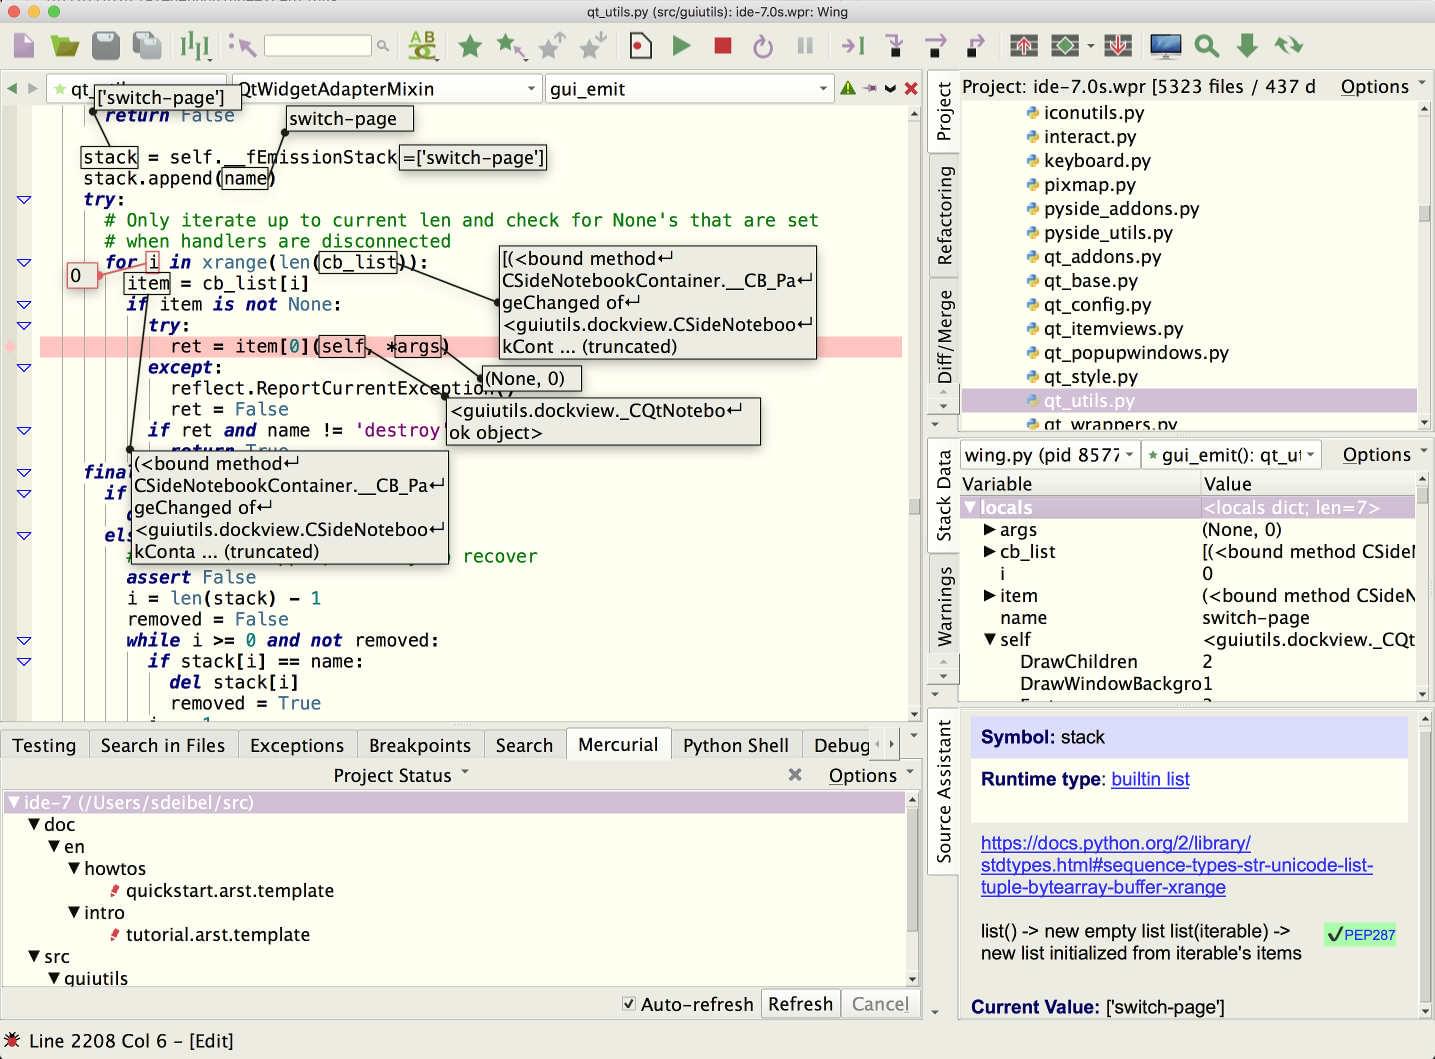 A screenshot of the Wing IDE interface